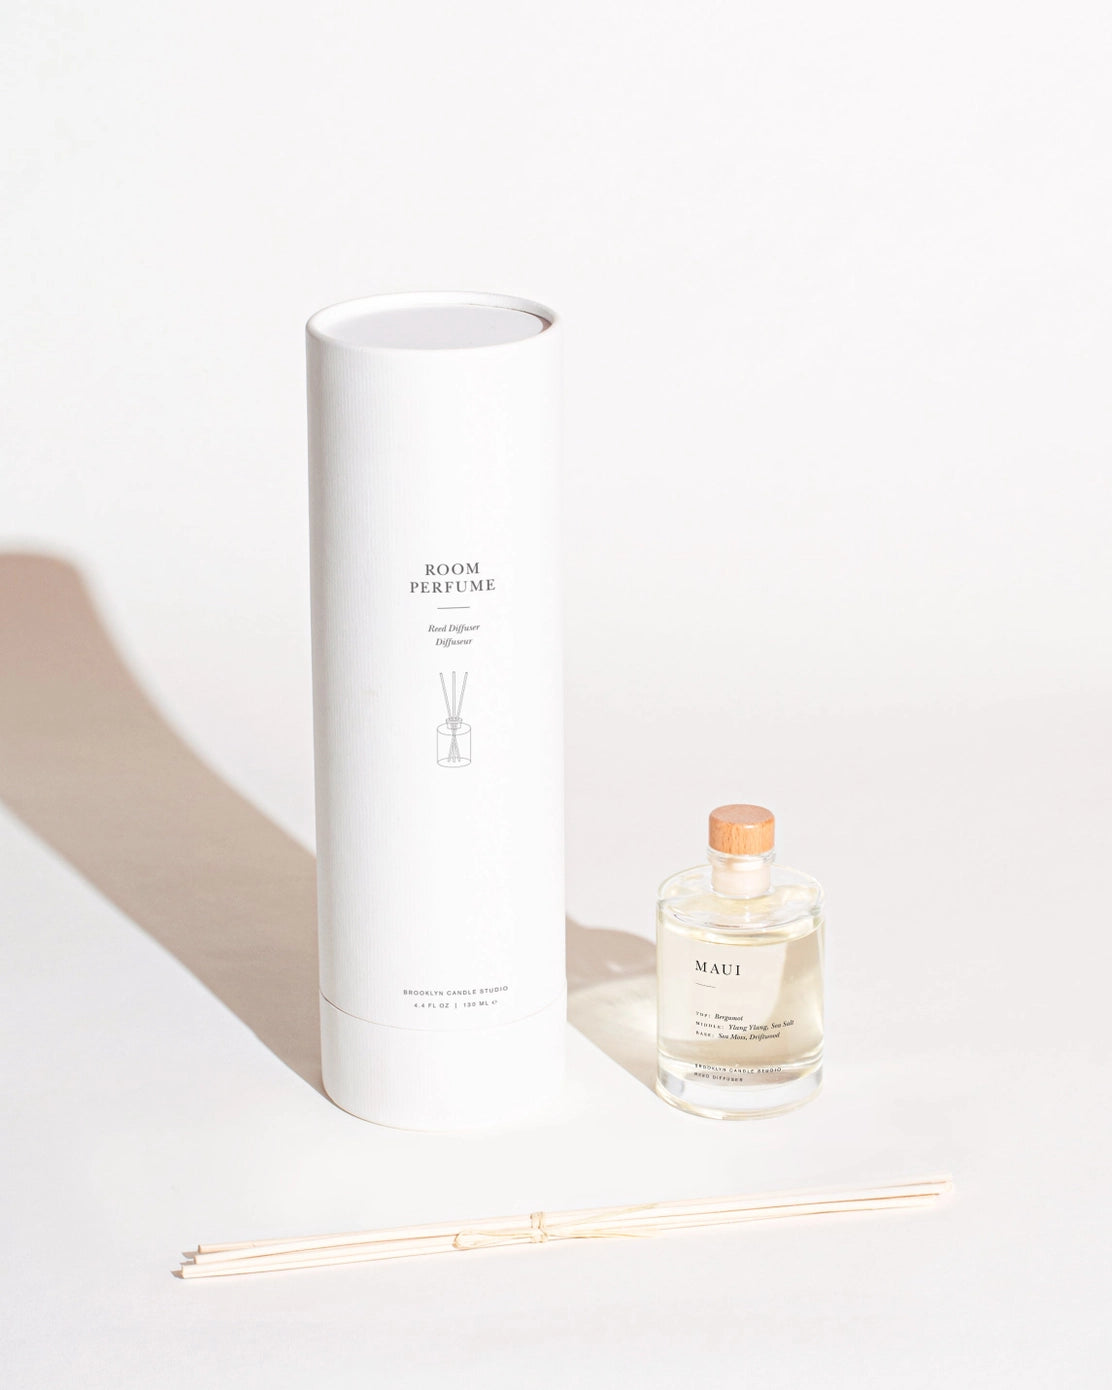 The Maui Reed Diffuser by Brooklyn Candle Studio